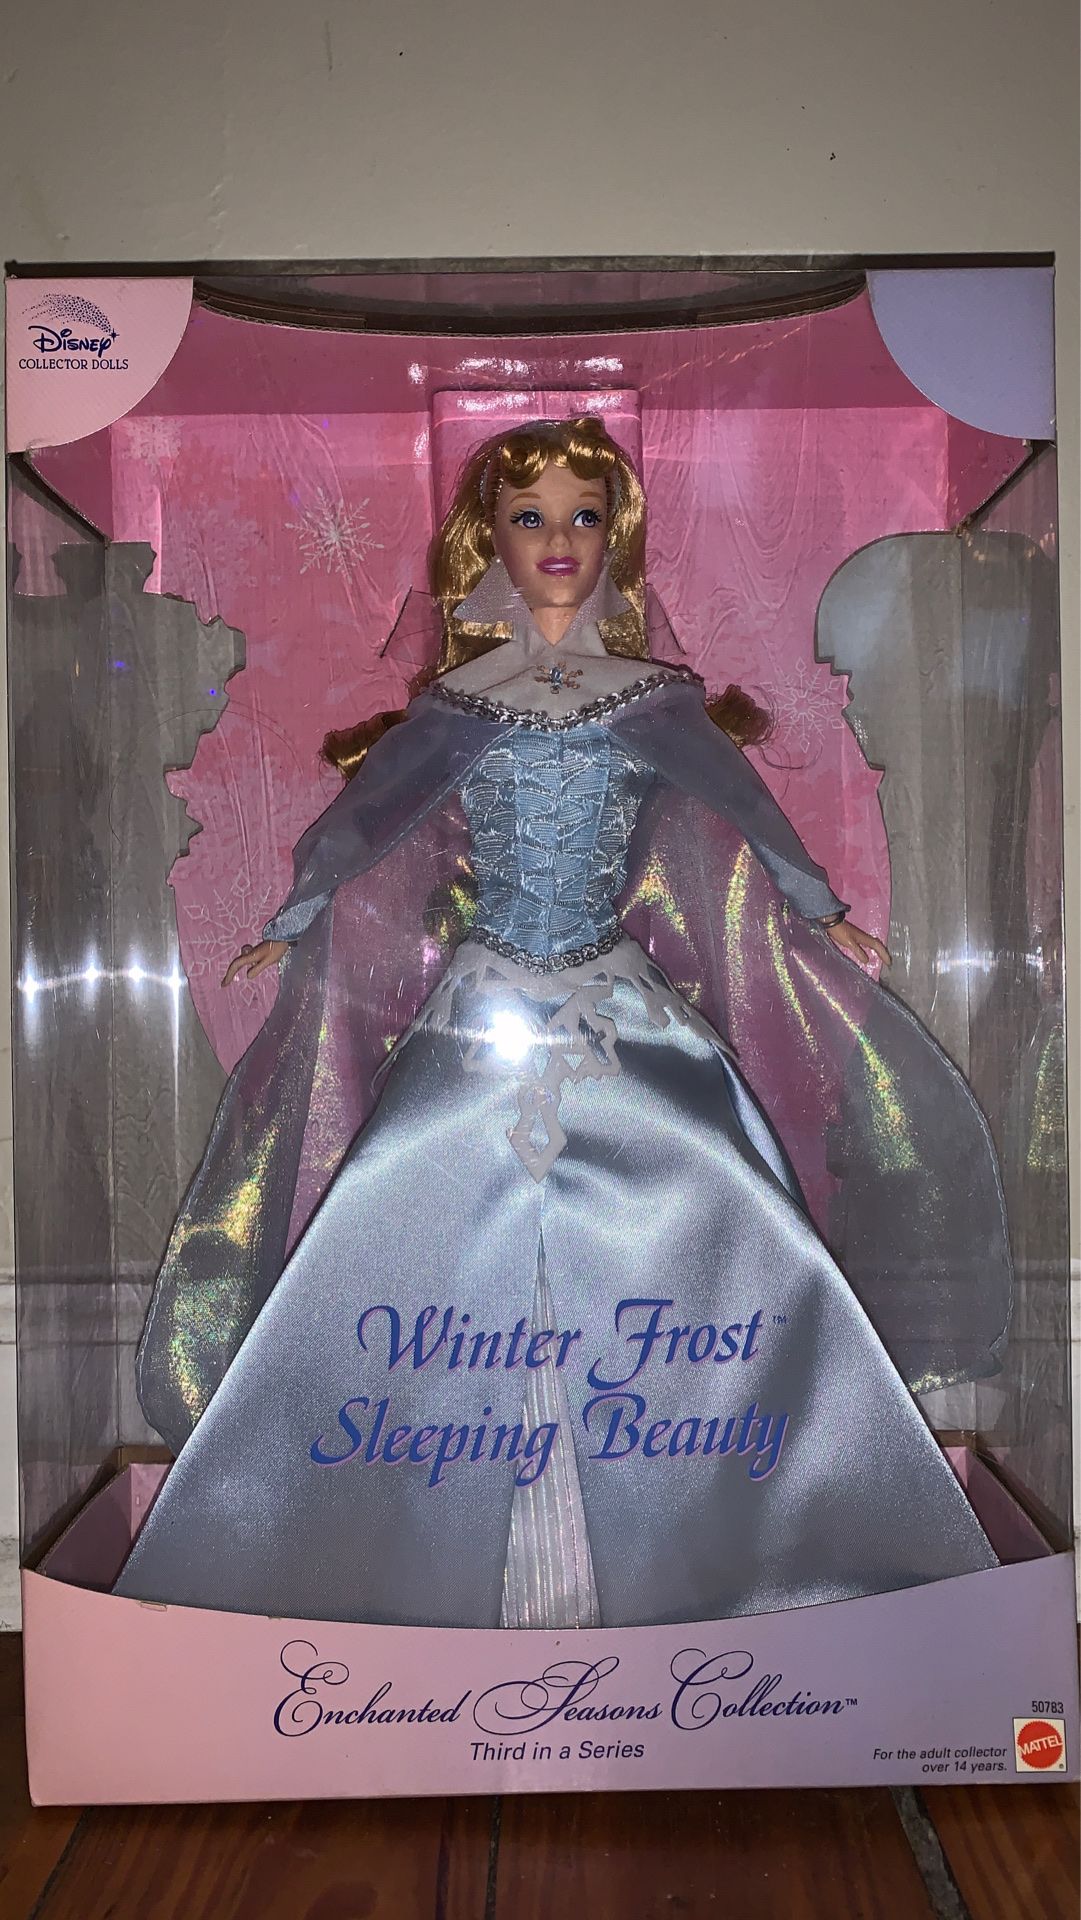 Disney Collector Dolls - Winter Frost Sleeping Beauty, #3 of Enchanted Seasons Collection